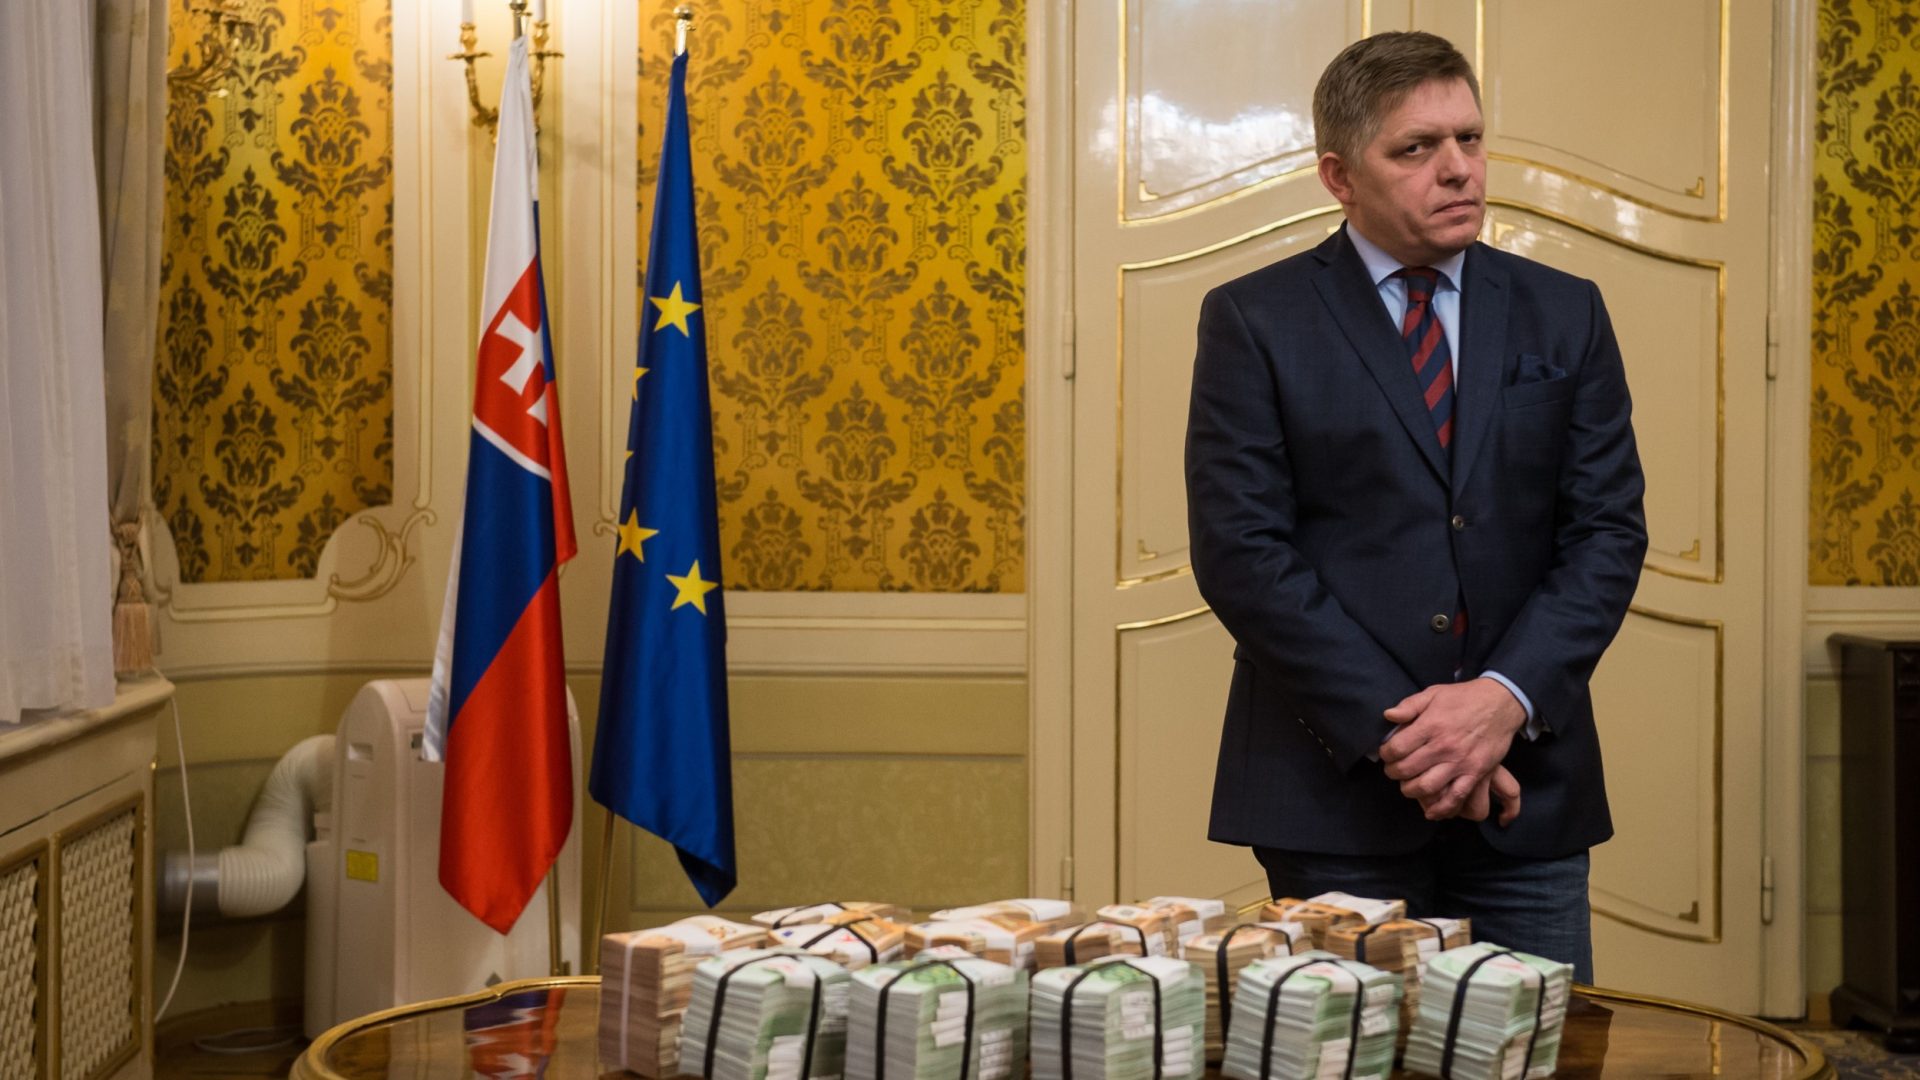 In government back in 2018, Robert Fico offered a reward of €1m for information about the murder of Ján Kuciak, an investigative journalist, and his fiancée. Photo: Vladimír Šimíček/AFP/Getty